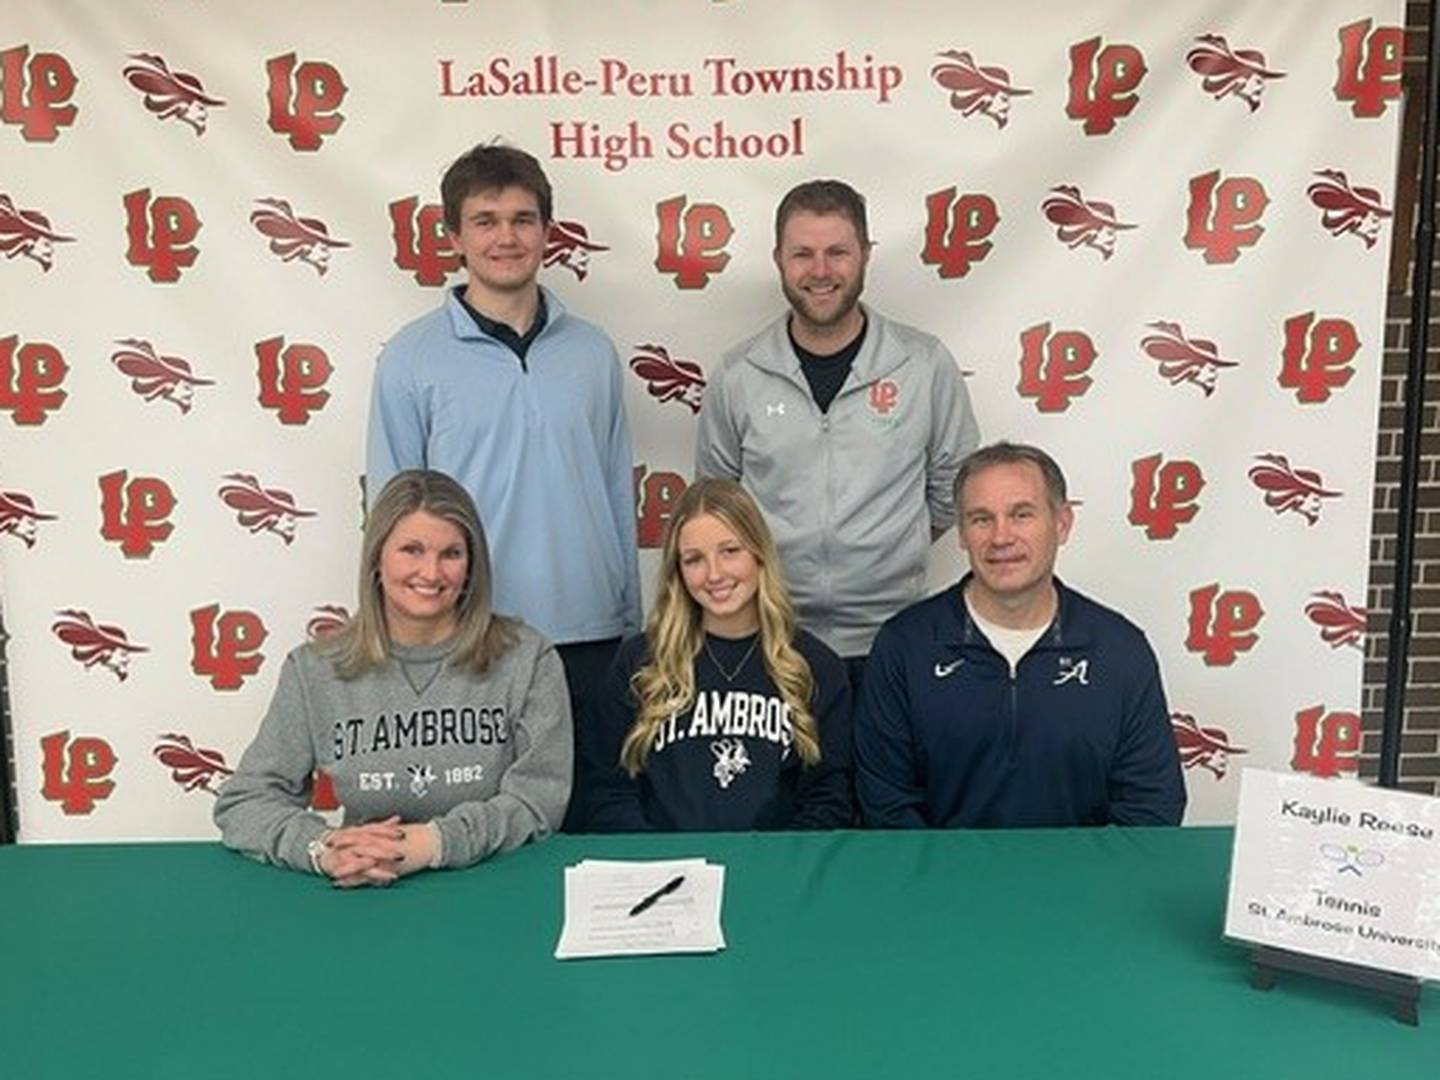 La Salle-Peru senior Kaylie Reese (seated, center) committed to play tennis at St. Ambrose University. She was joined by her parents (seated) Kim and Bob, her brother, Connor (standing, left) and L-P coach Aaron Guenther.